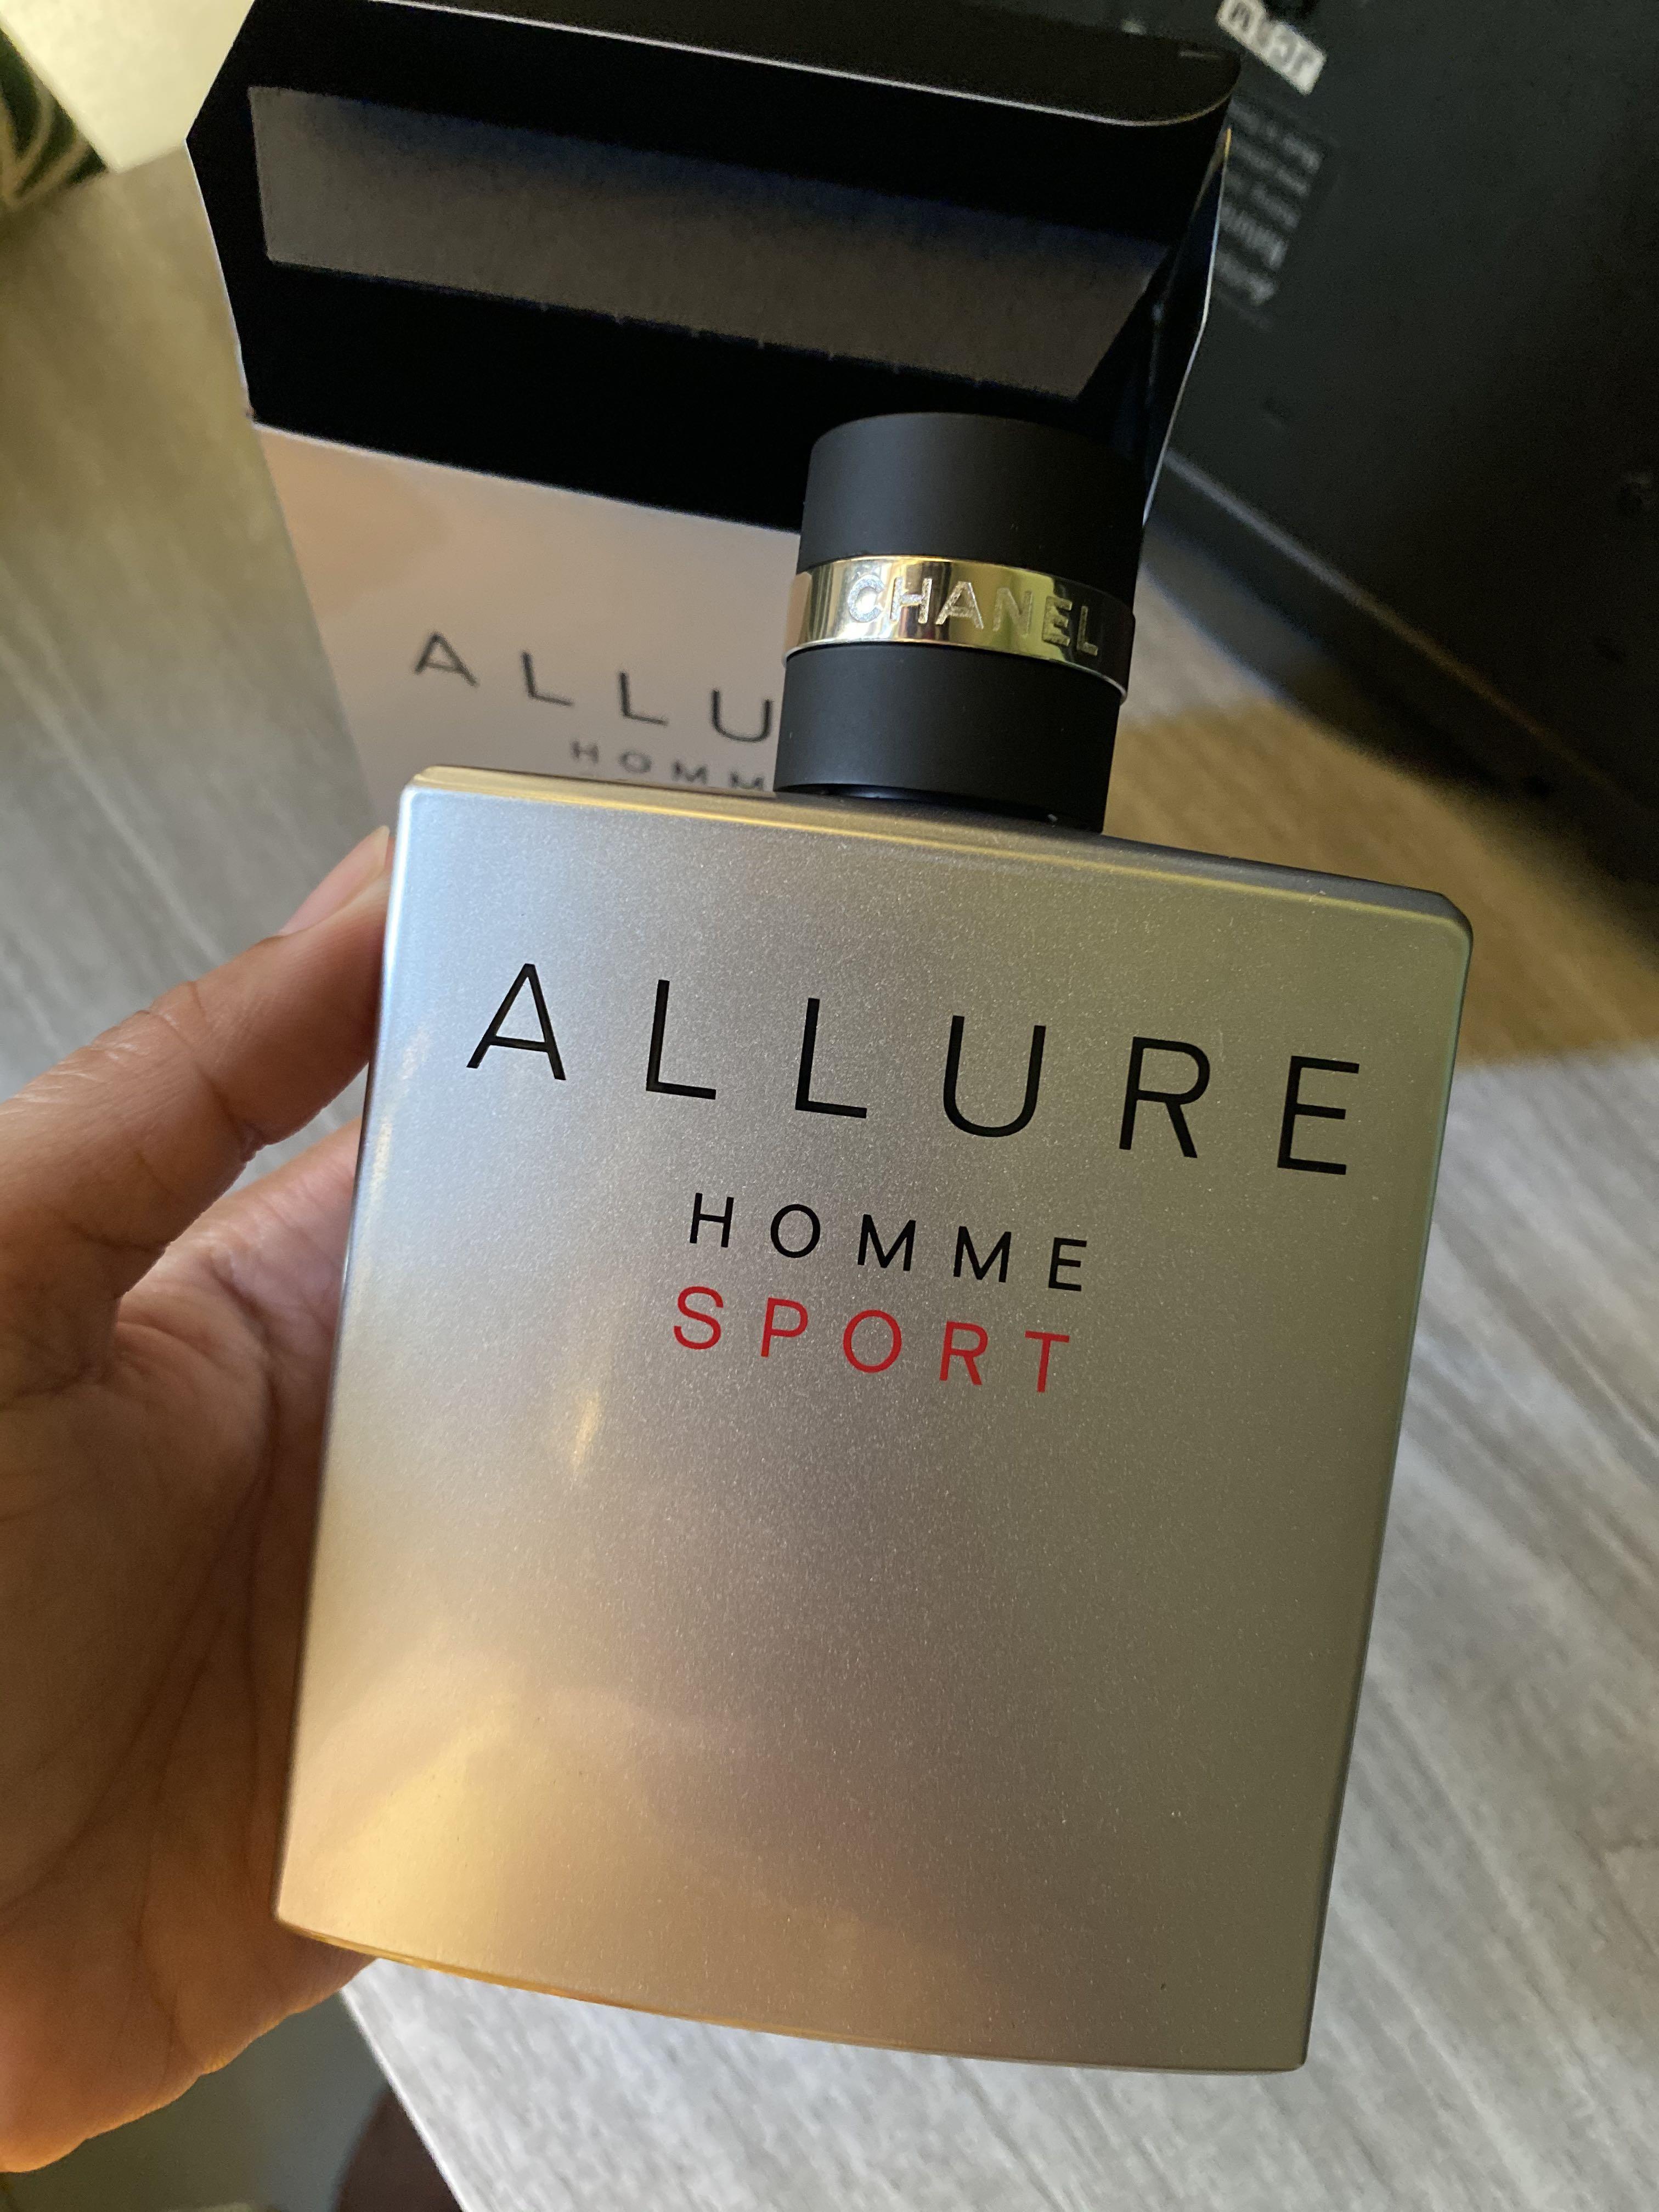 chanel allure homme sport 5 oz